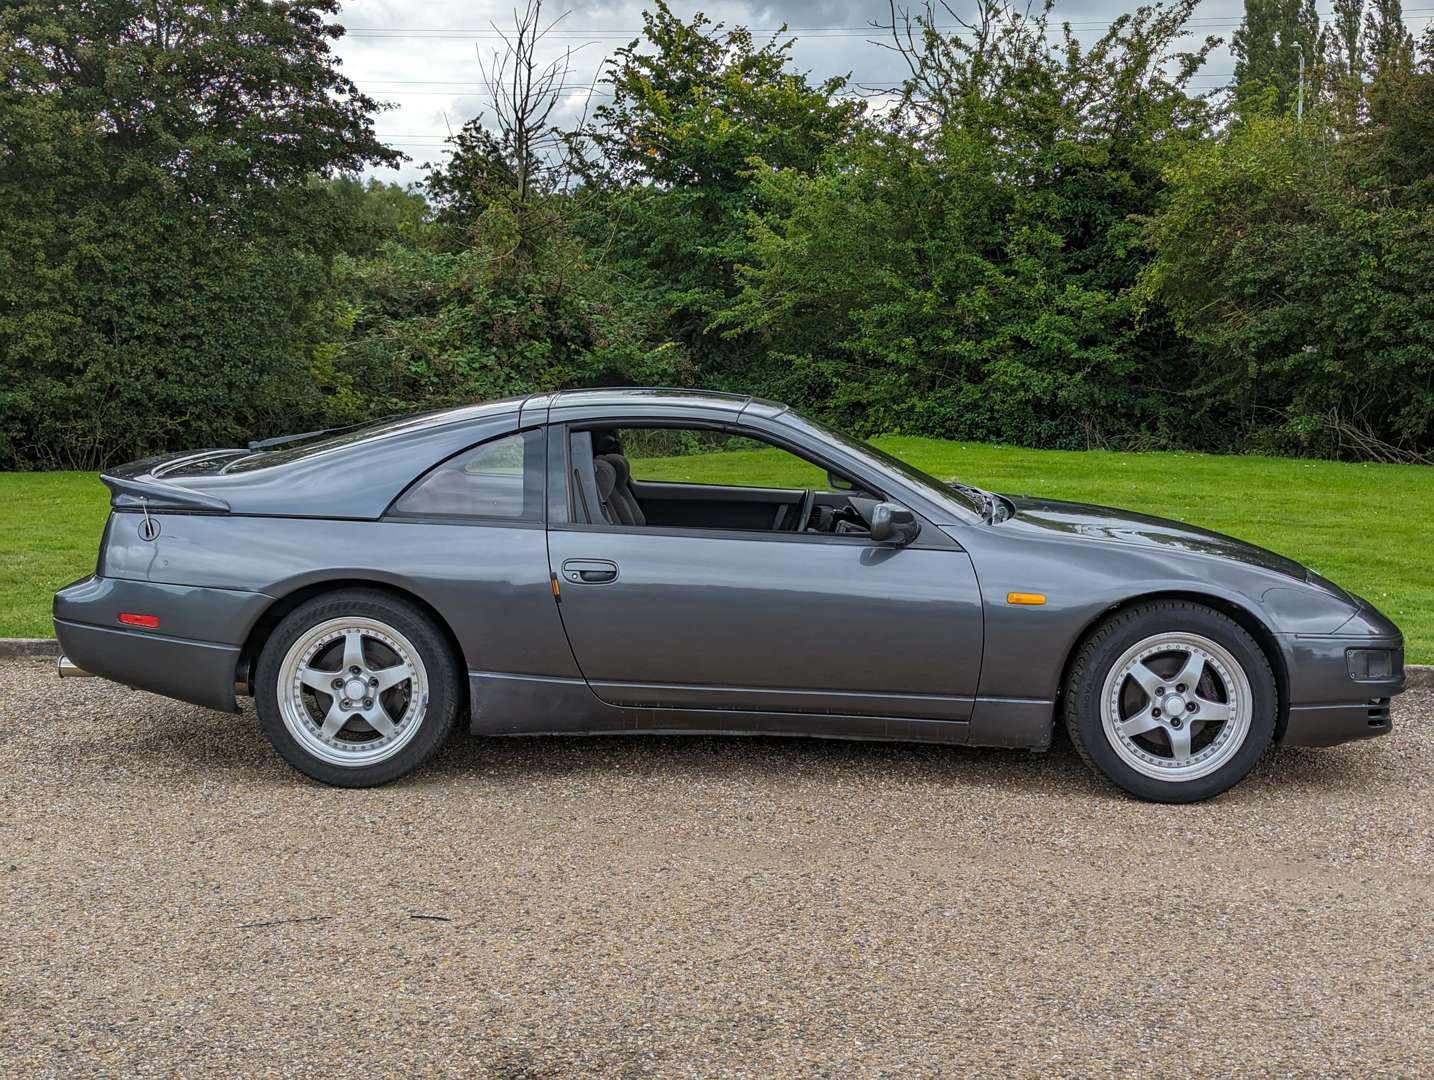 1990 NISSAN 300 ZX 2+2 | Saturday 19th & Sunday 20th August 